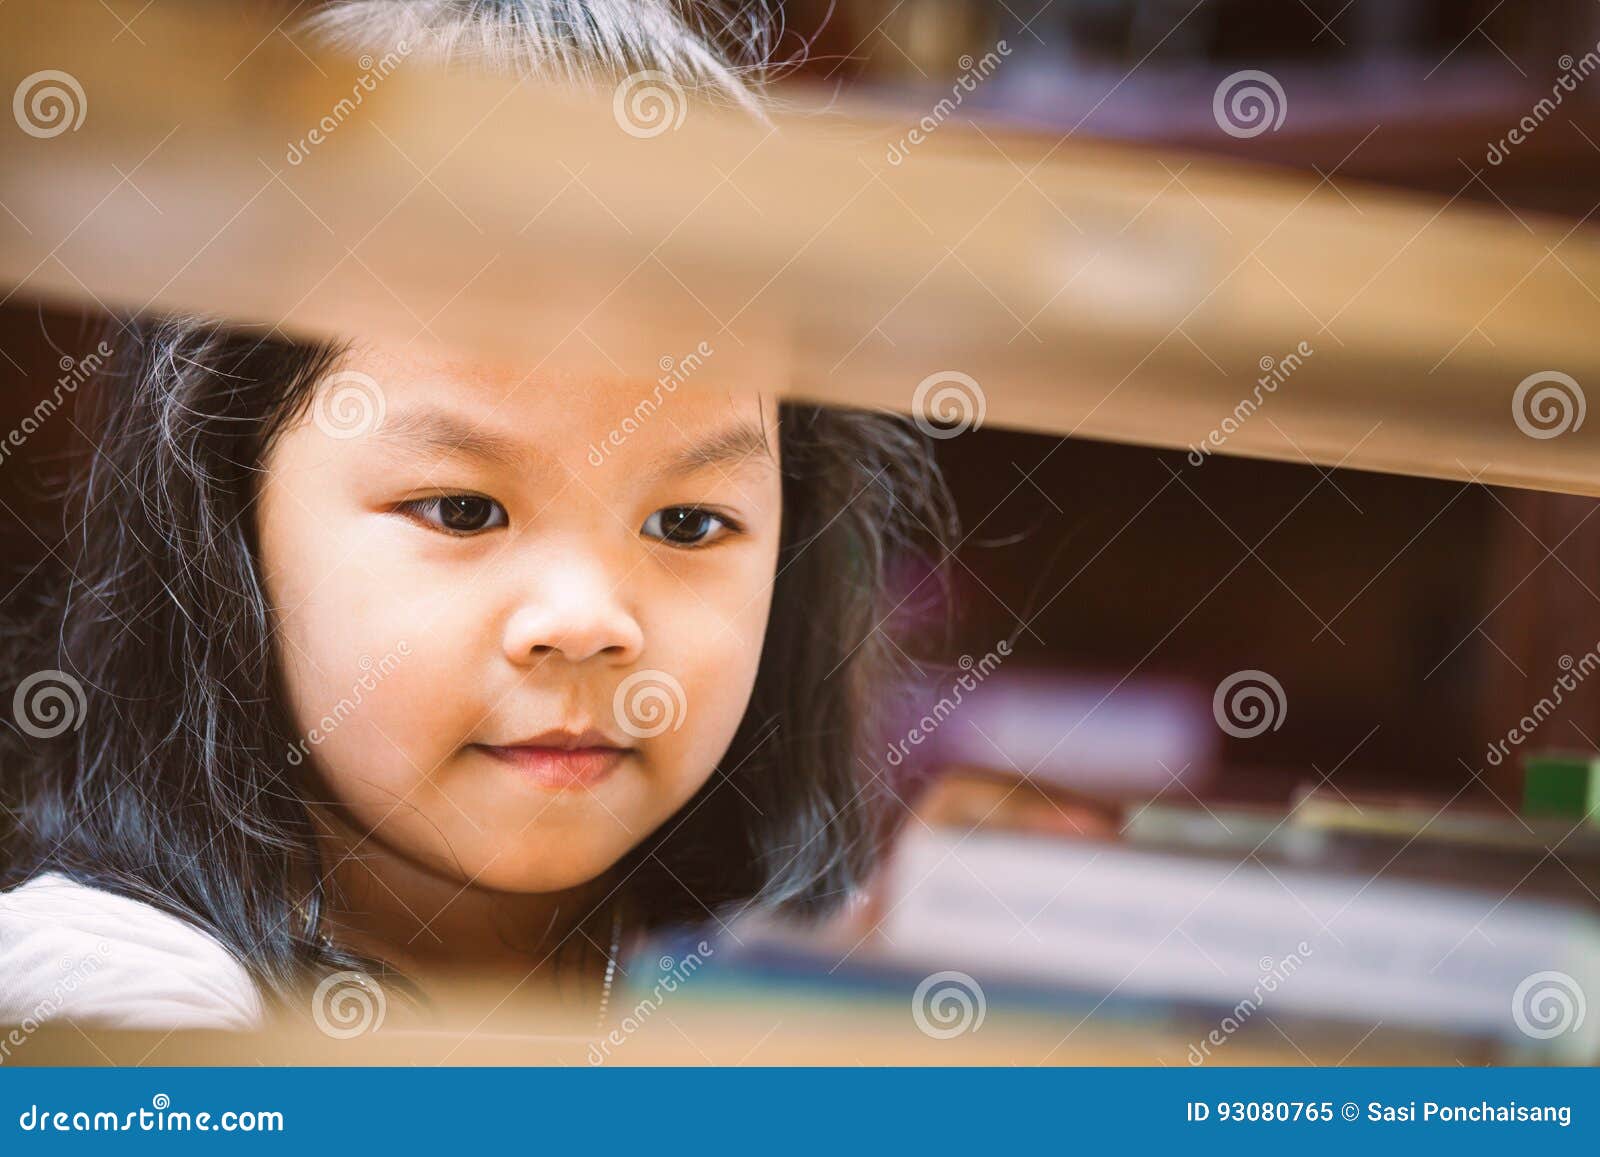 Cute Asian Little Girl Is Finding A Book On Bookshelf Stock Image